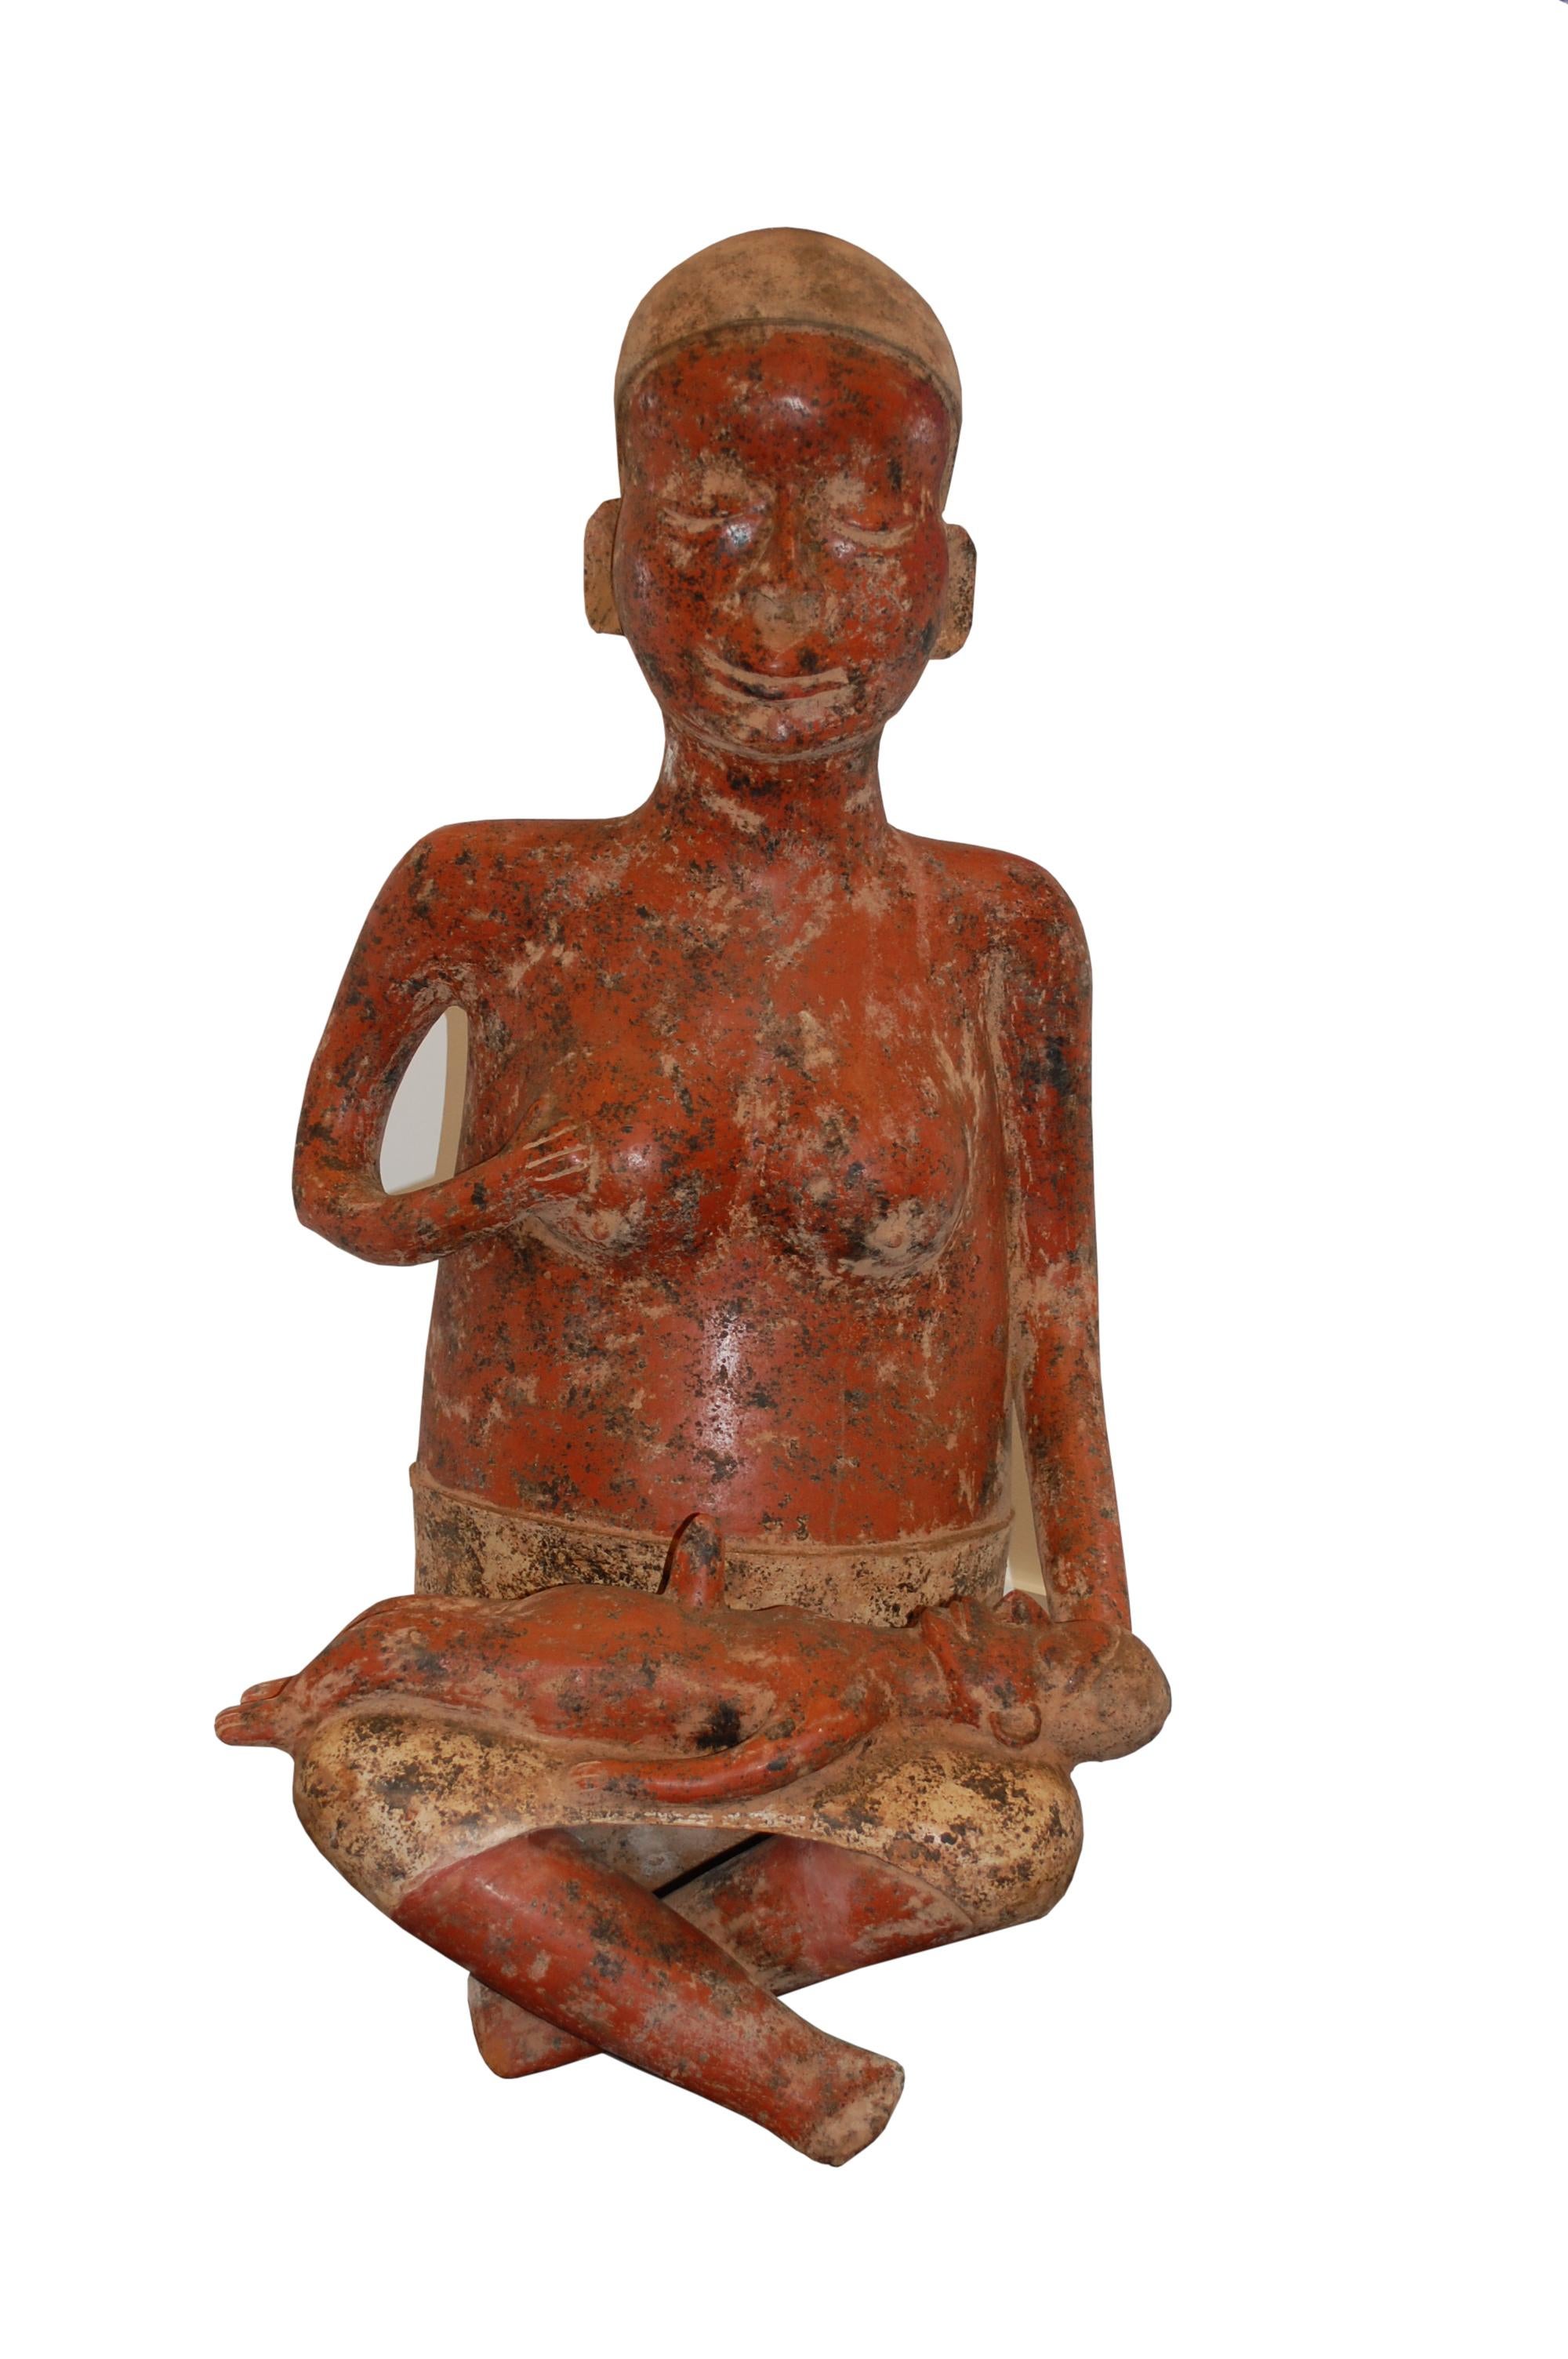   Seated Woman With Child Terra-Cotta Sculpture